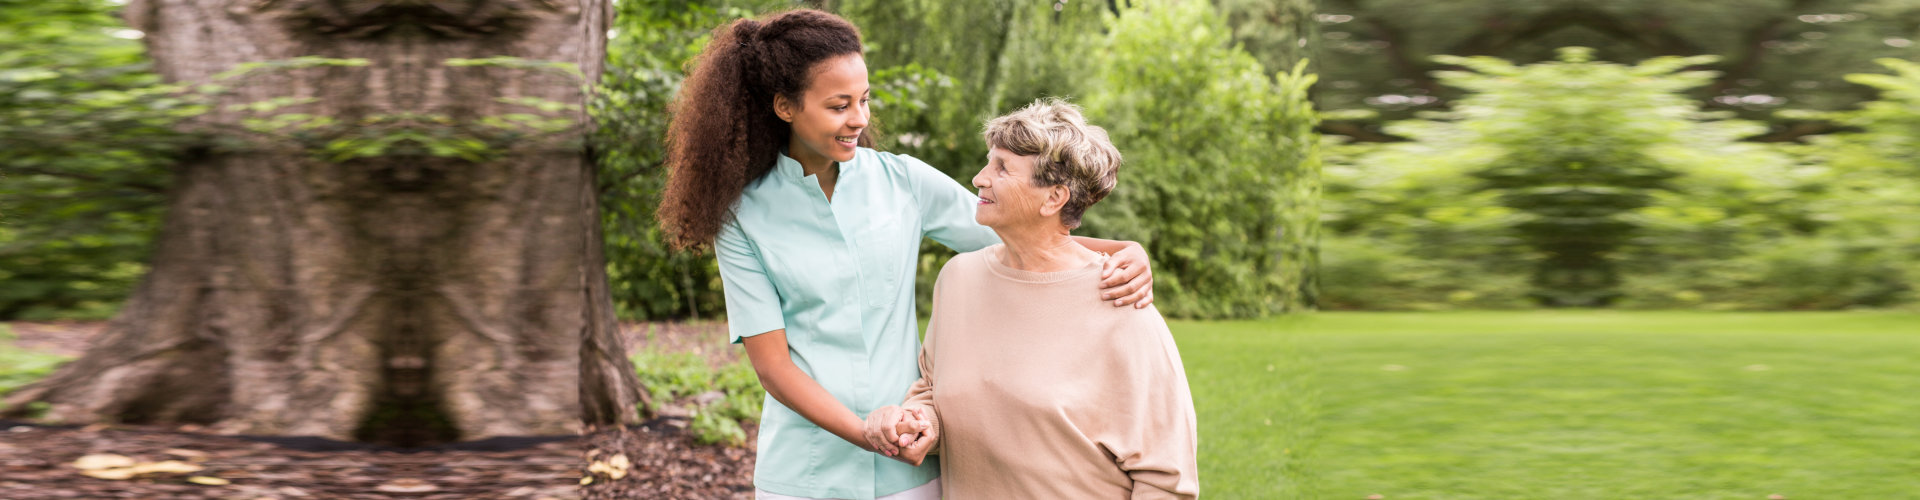 Caregiver and senior woman holding hands while smiling